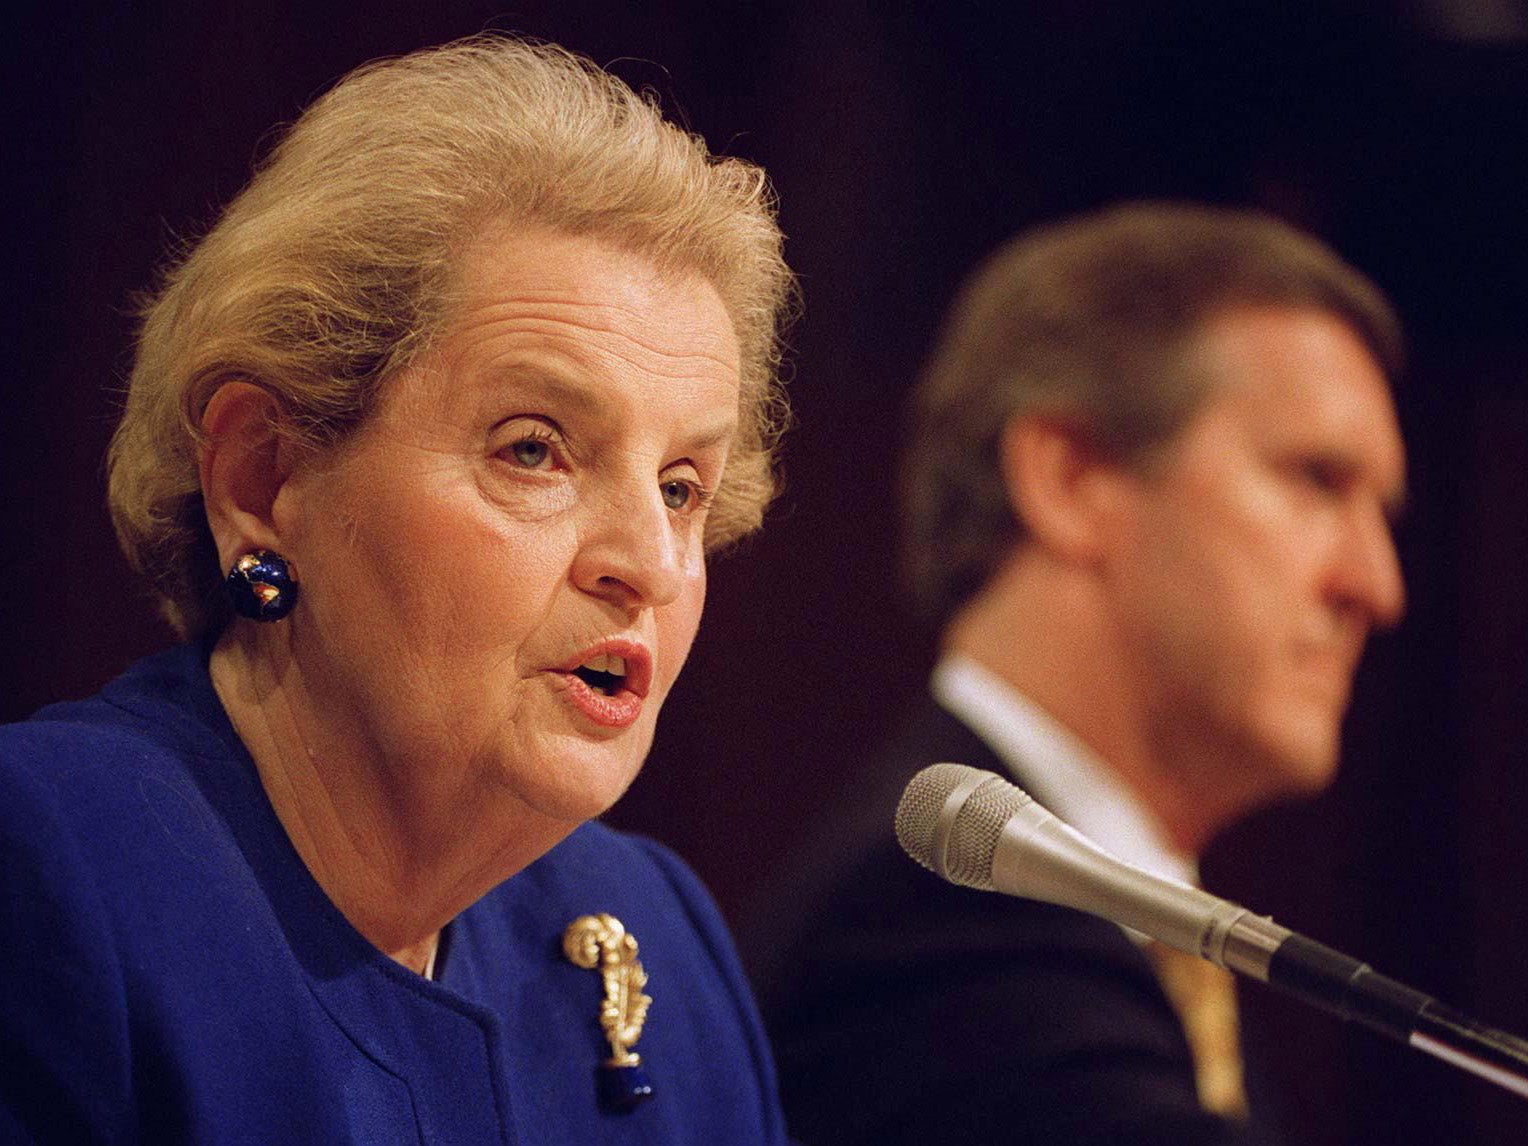 Albright was known for being a cold-blooded bureaucratic warrior